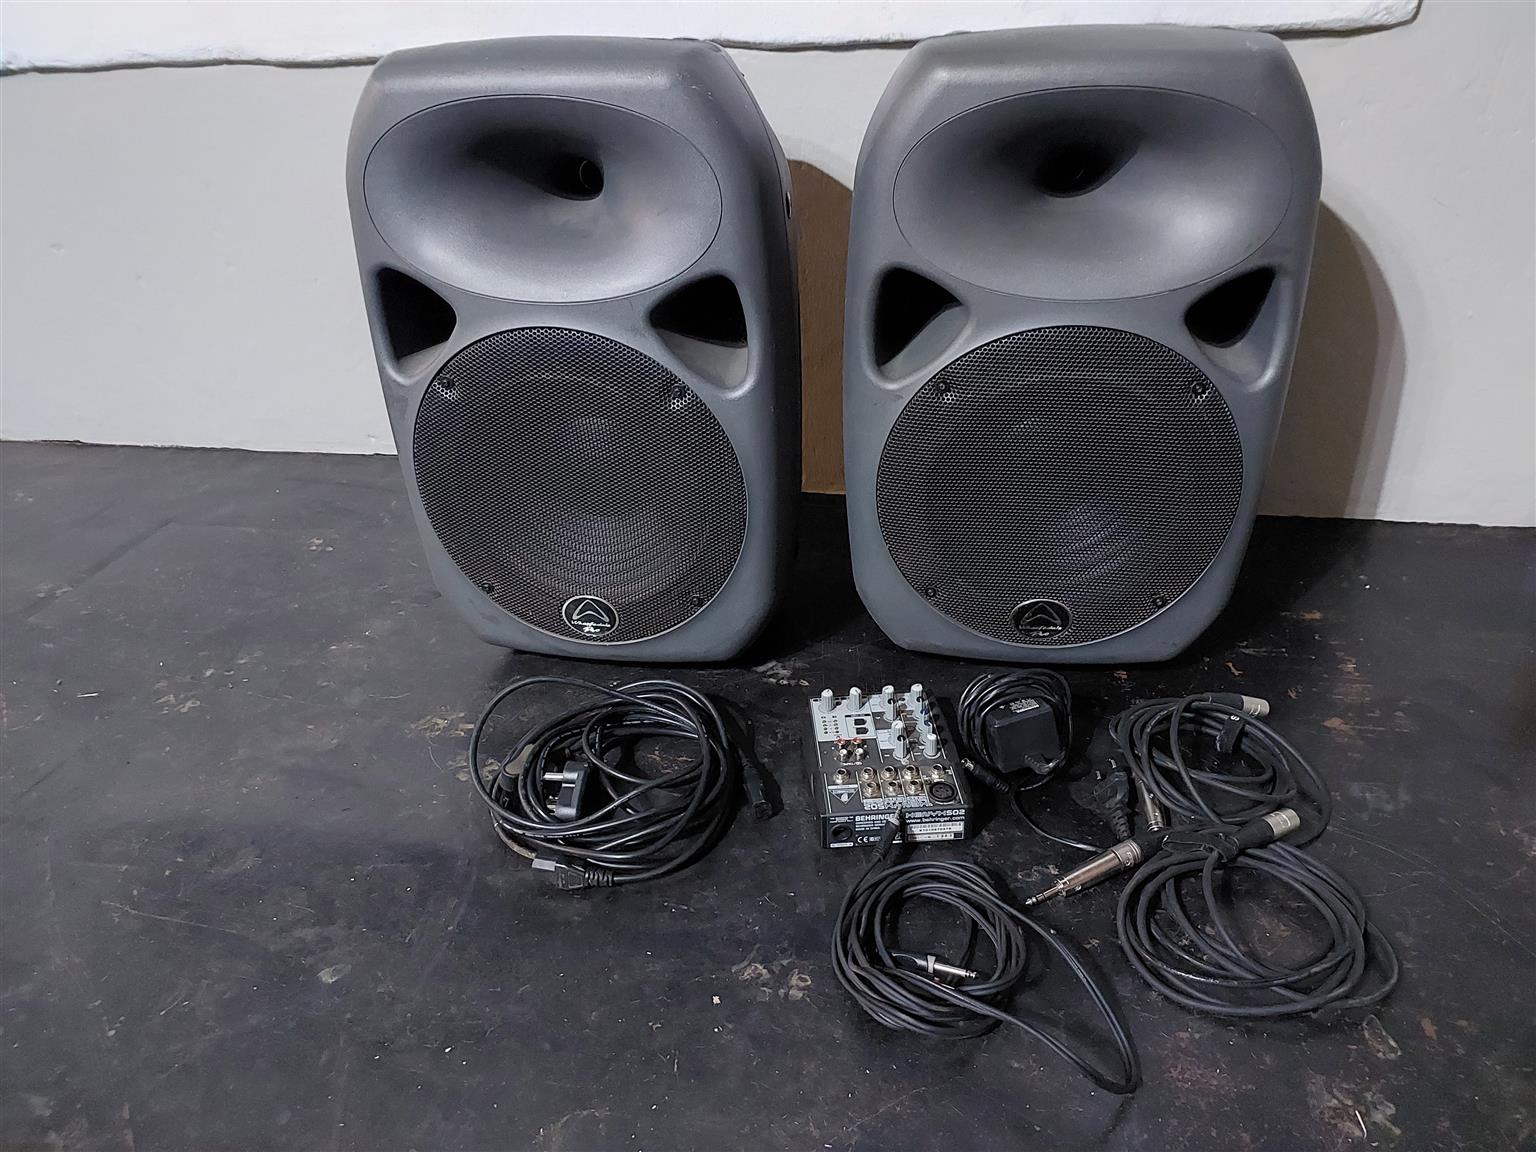 Wharfedale speakers and mixer